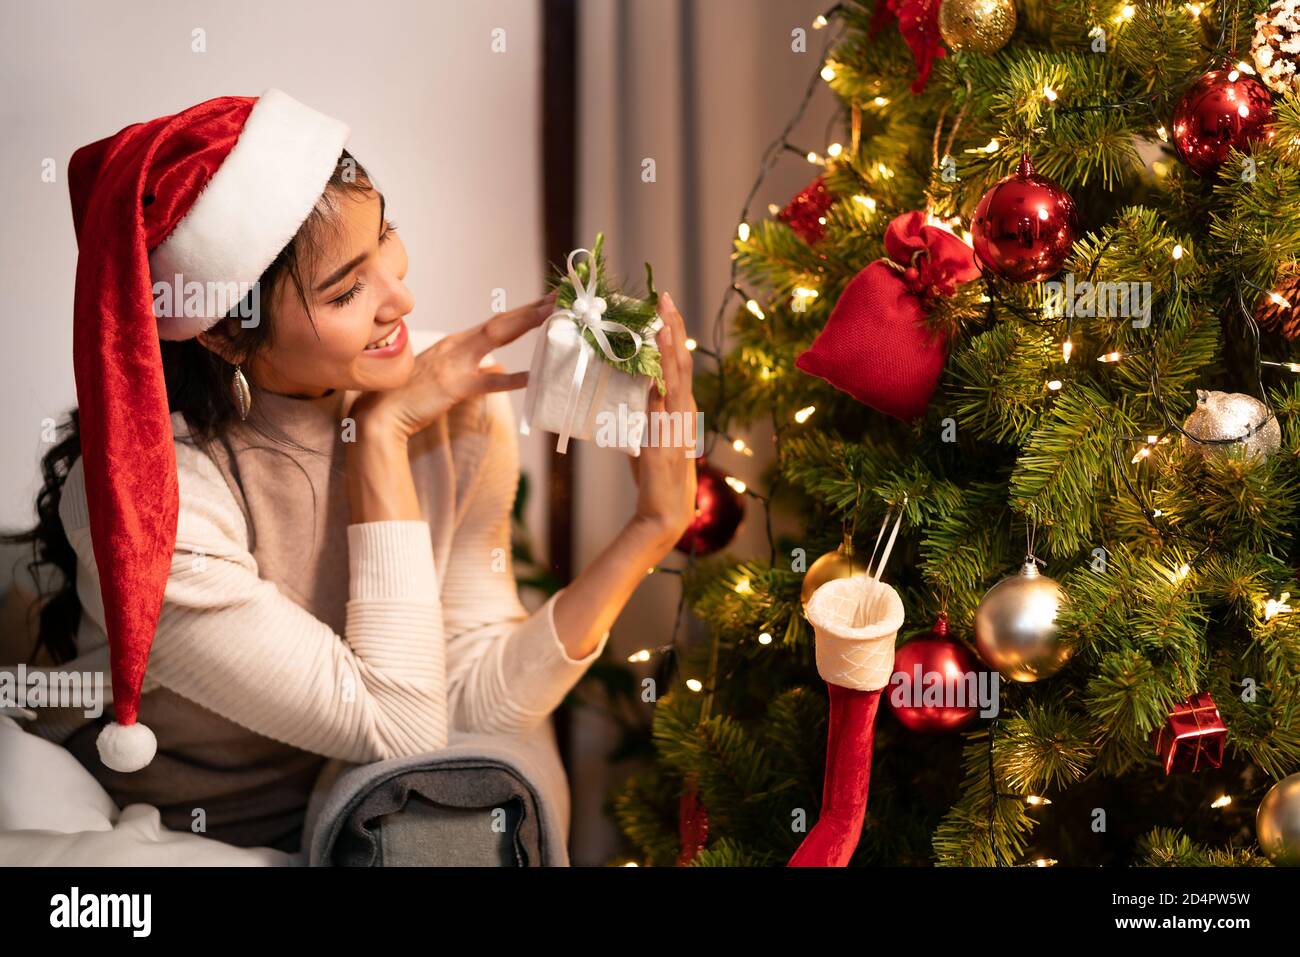 Beautiful asian woman holding Christmas ornament for decorate on christmas tree preparing for season greeting of merry christmas and happy holiday. Stock Photo